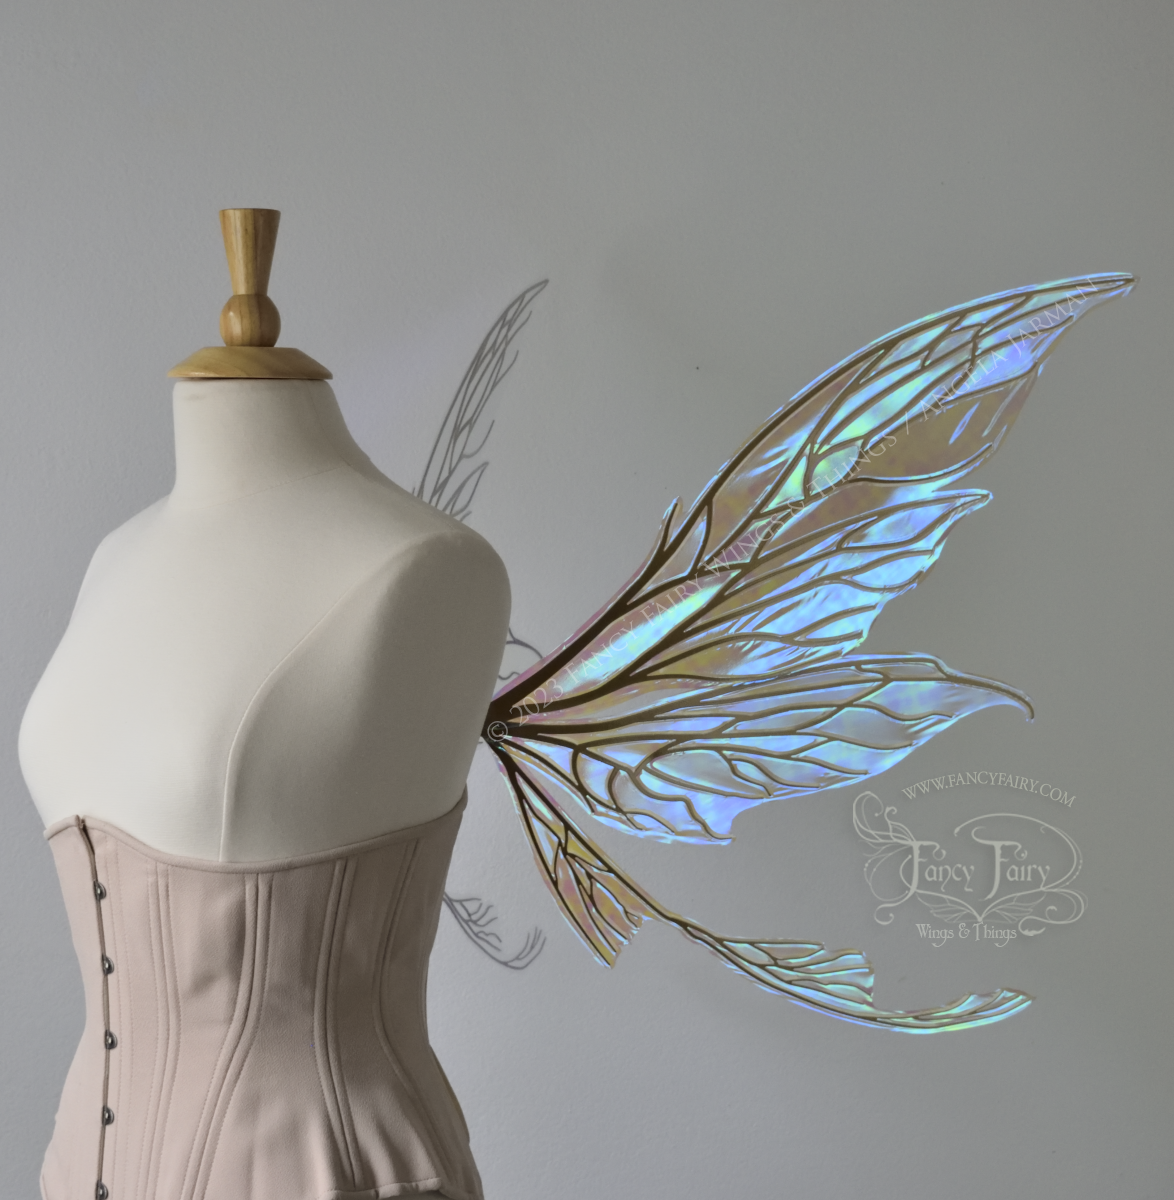 Side view of a dress form wearing an underbust corset & large blue iridescent fairy wings with gold veins. Upper panels are elongated with pointed tips, curved ‘tail’ 